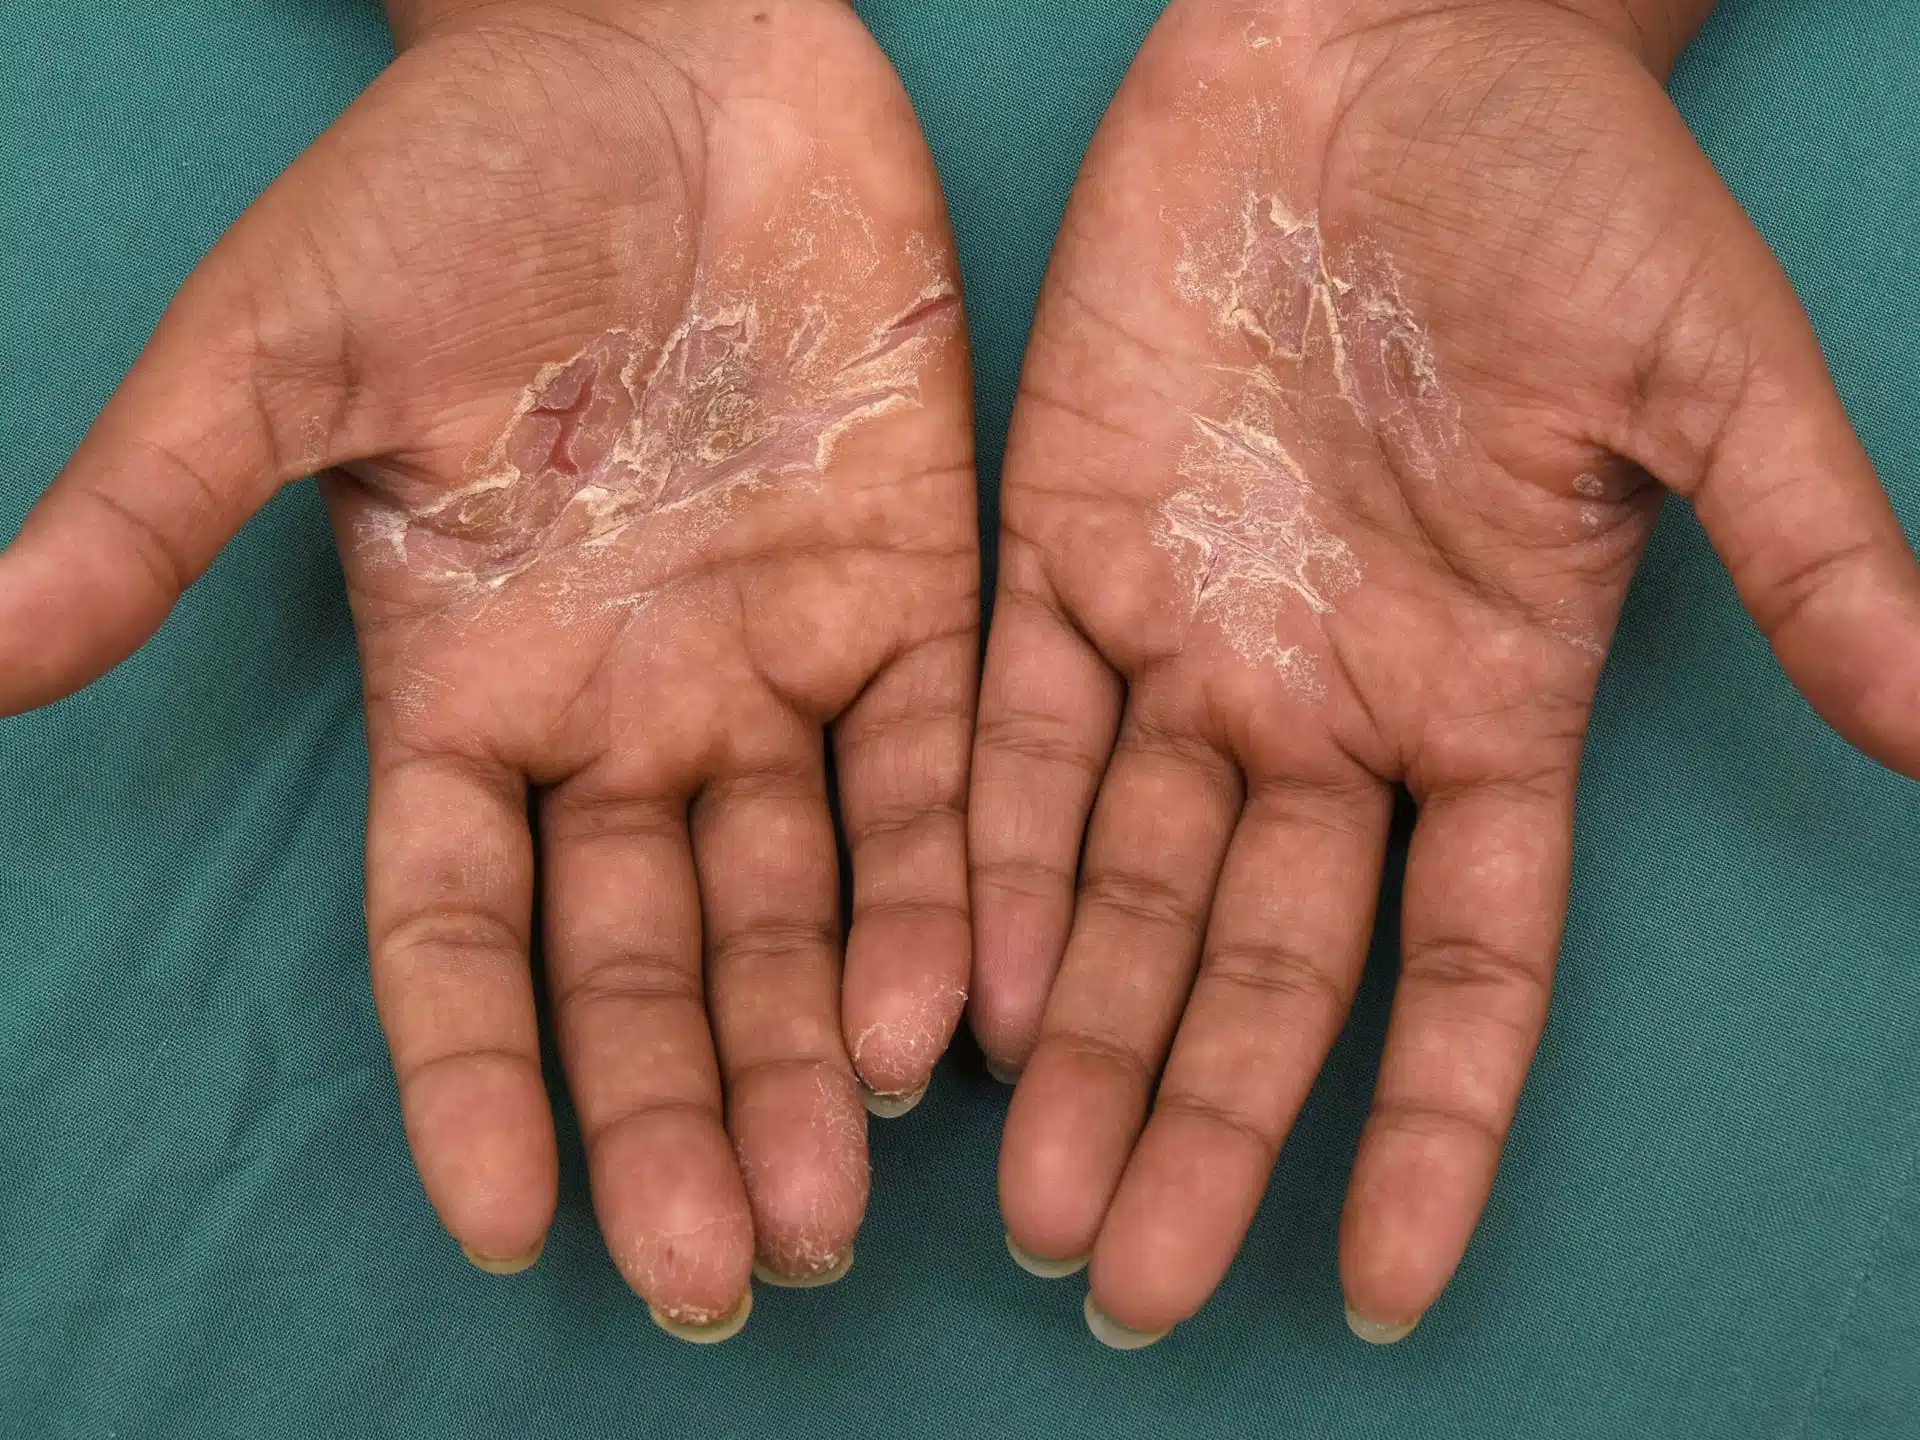 Hand Eczema About And Treatments